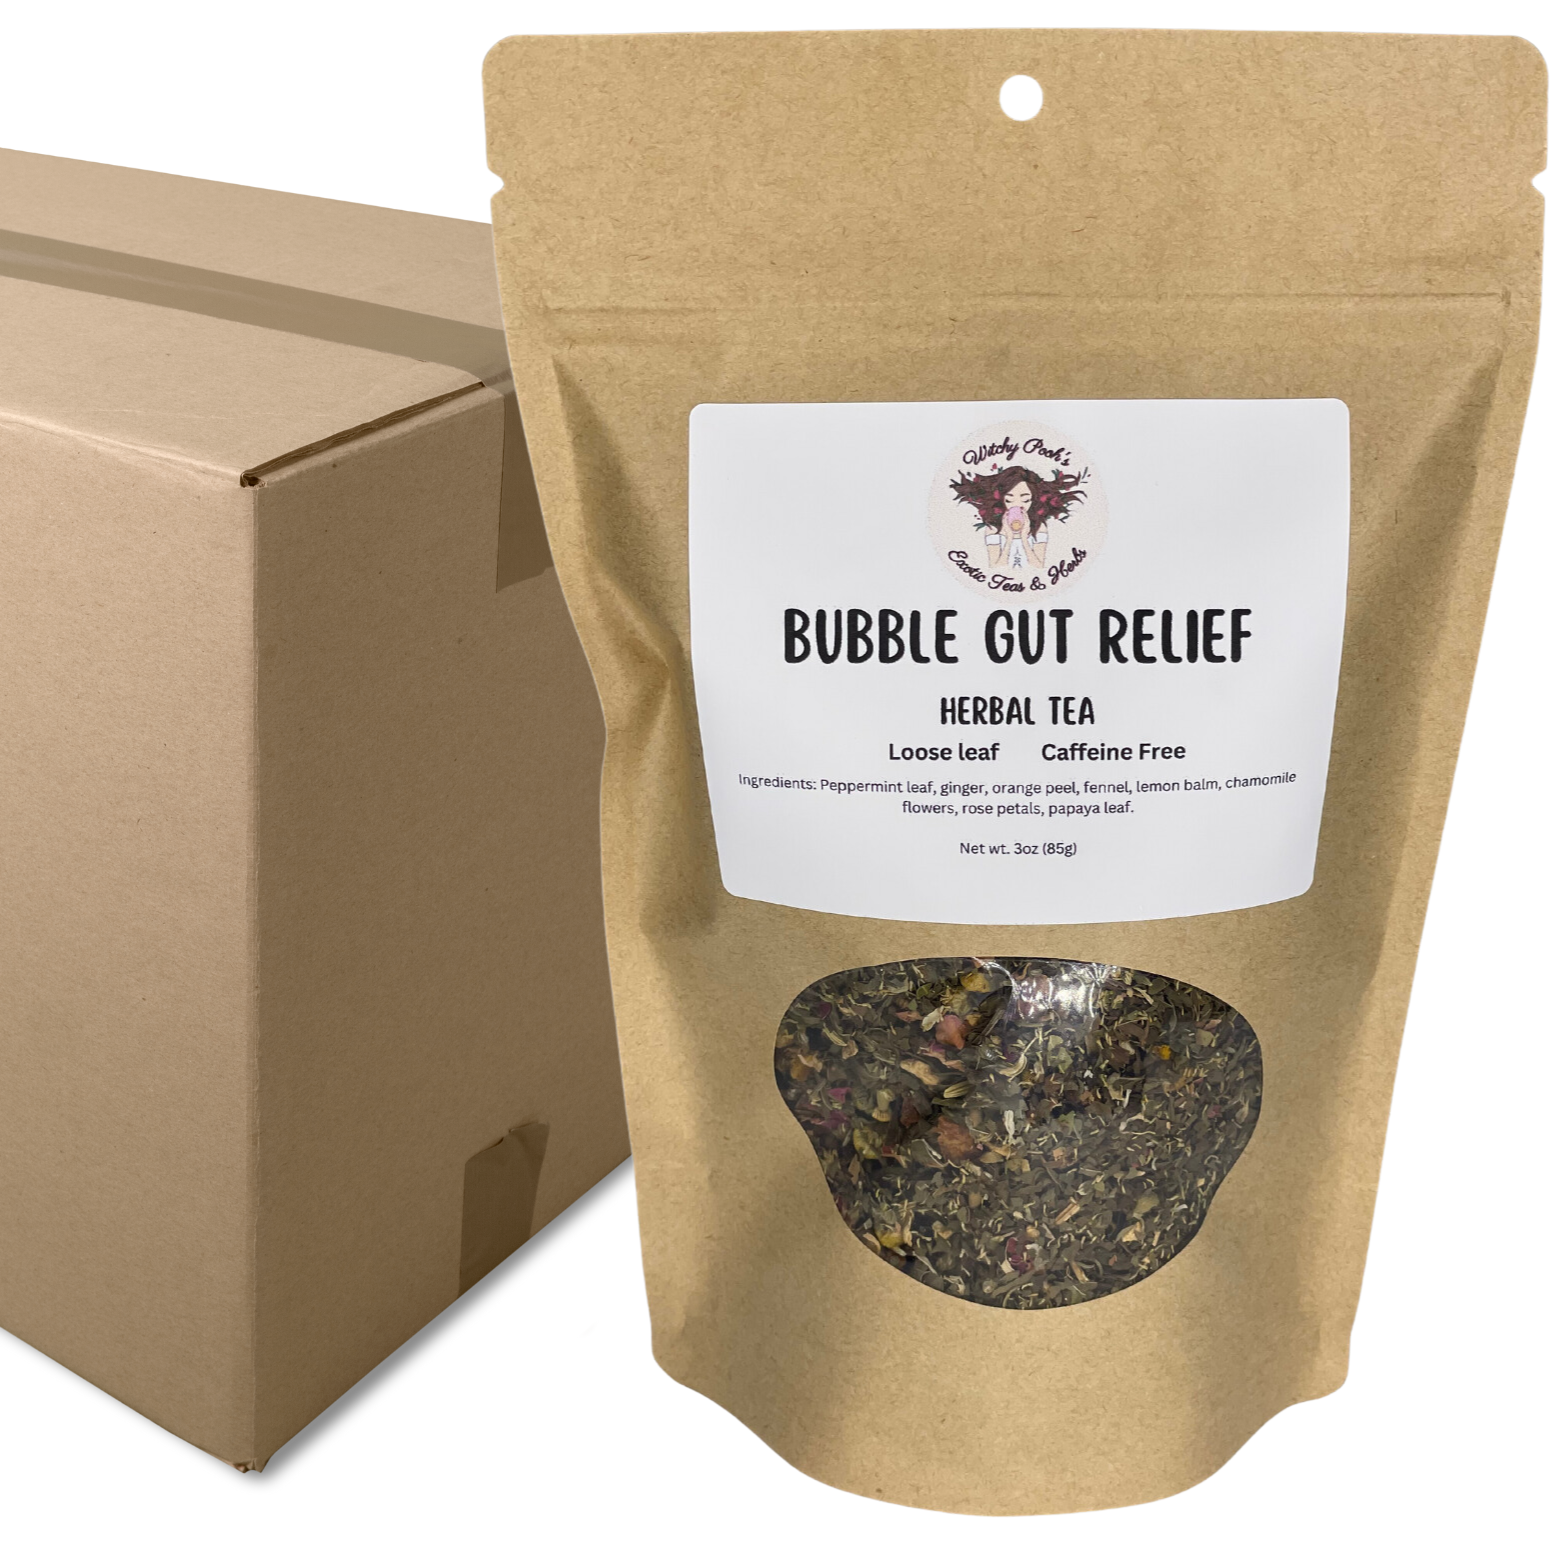 Witchy Pooh's Bubble Gut Relief Loose Leaf Herbal Functional Tea, Caffeine Free, For Digestive Issues-19